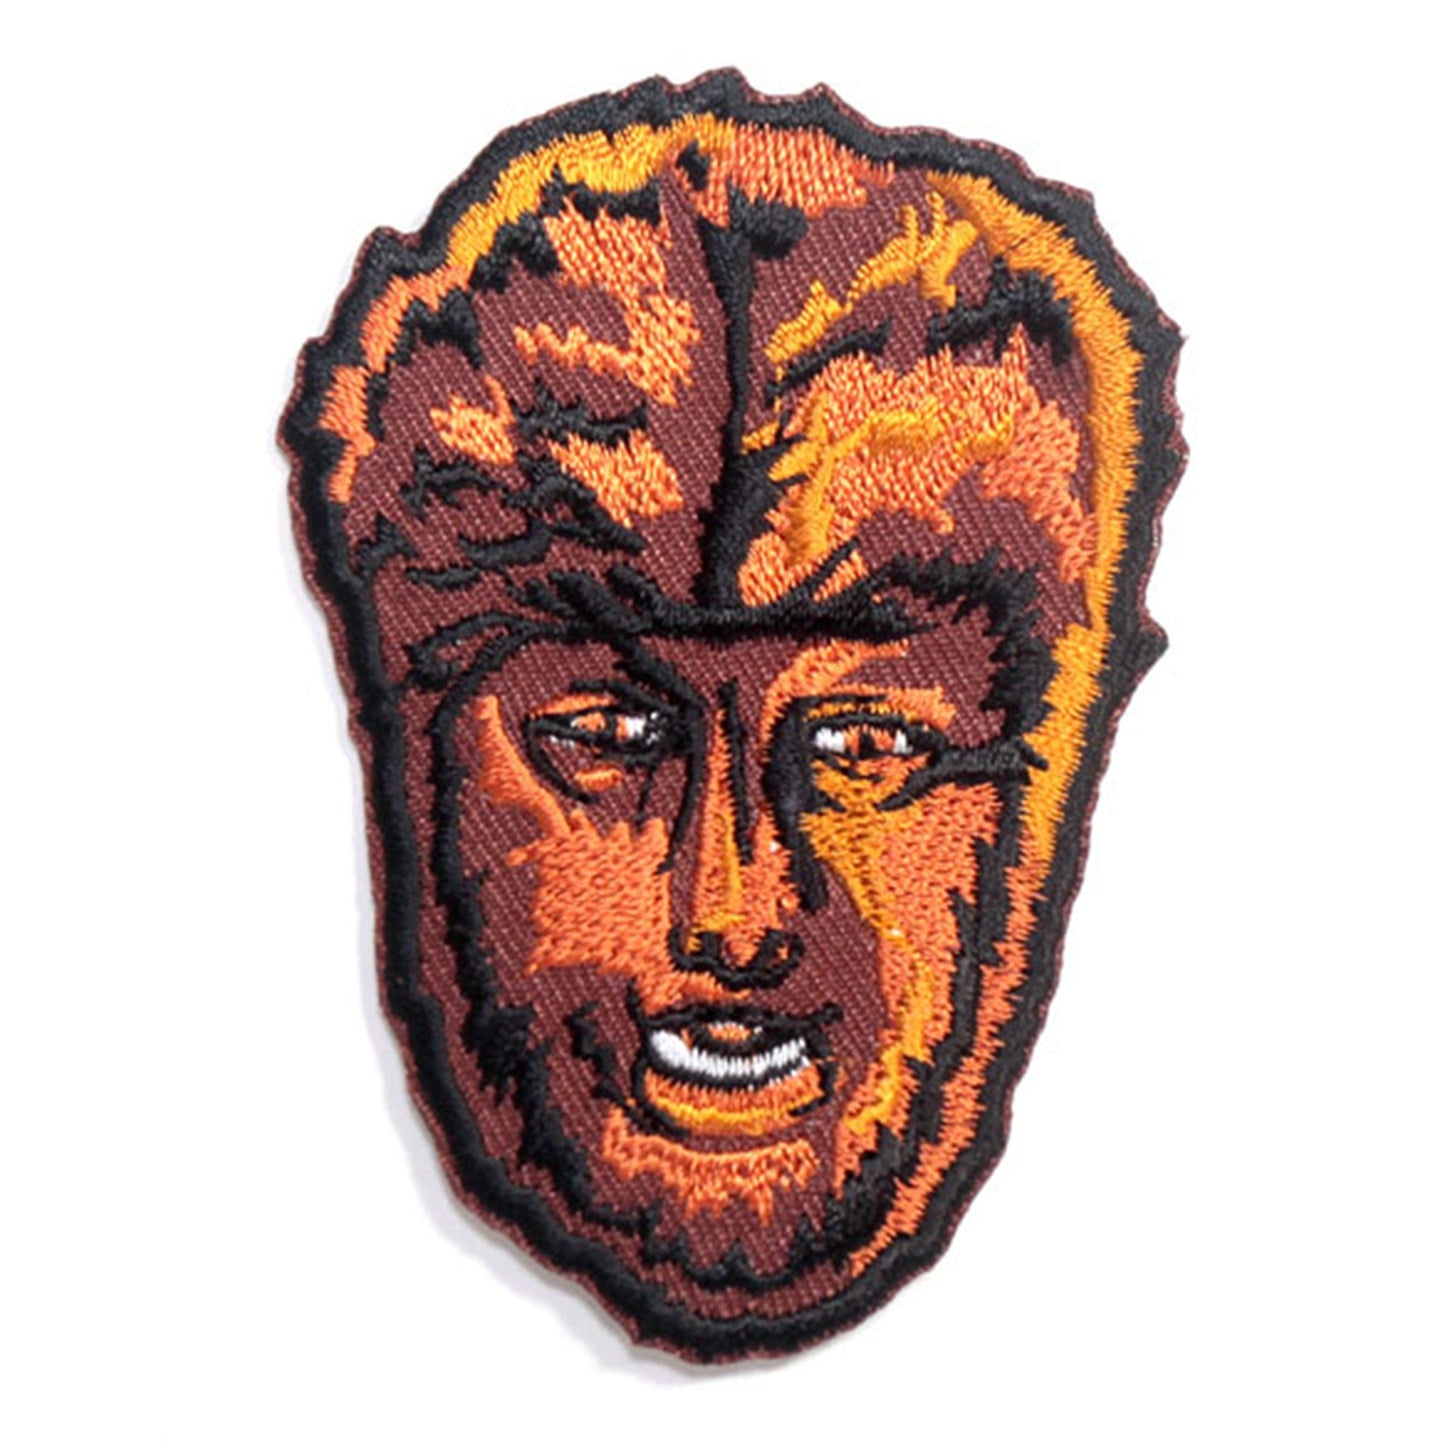 The Wolfman Embroidered Patch